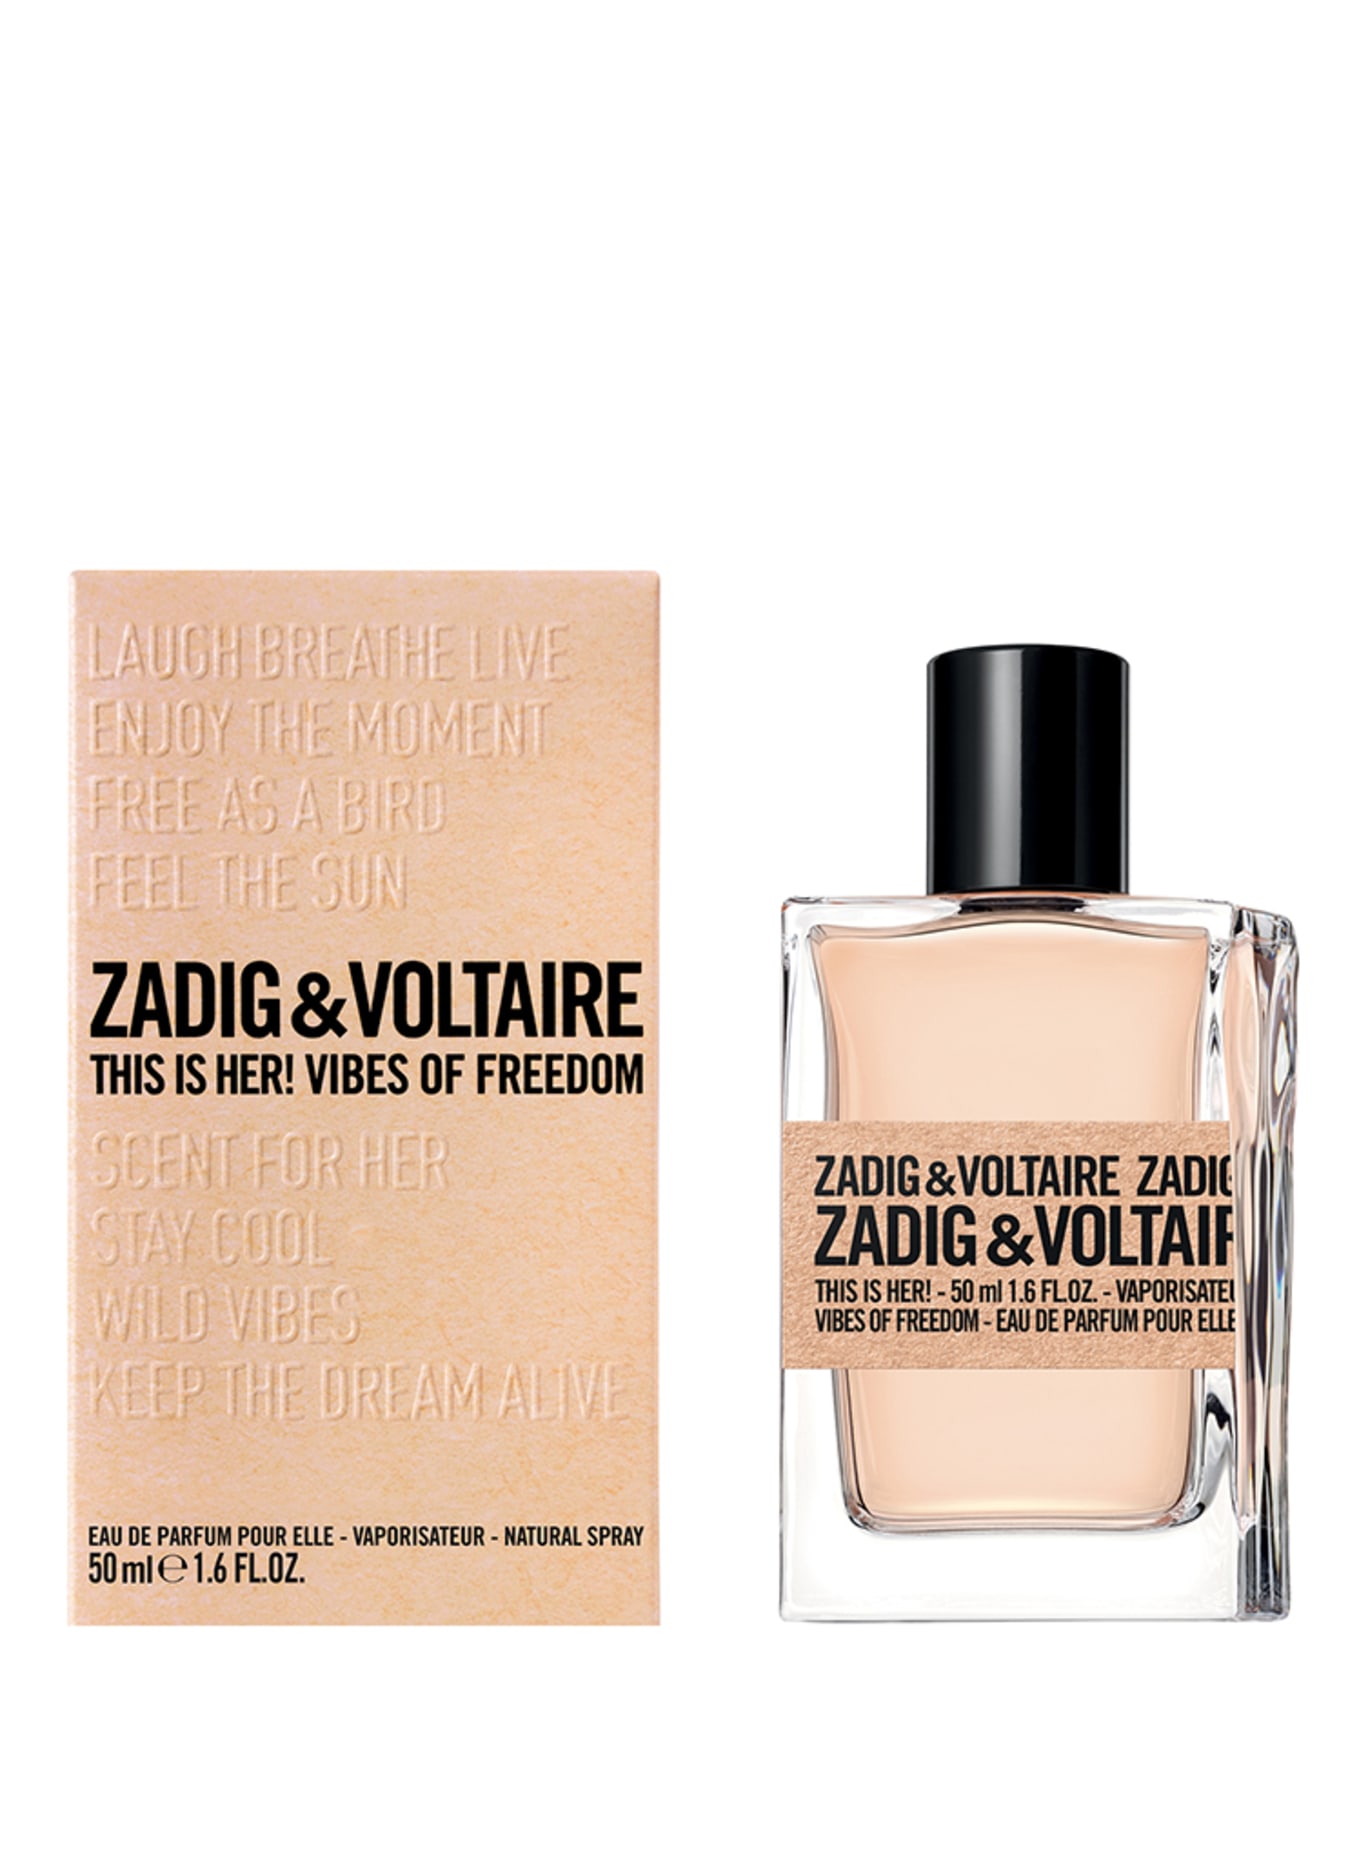 ZADIG & VOLTAIRE Fragrances THIS IS HER! VIBES OF FREEDOM (Bild 2)